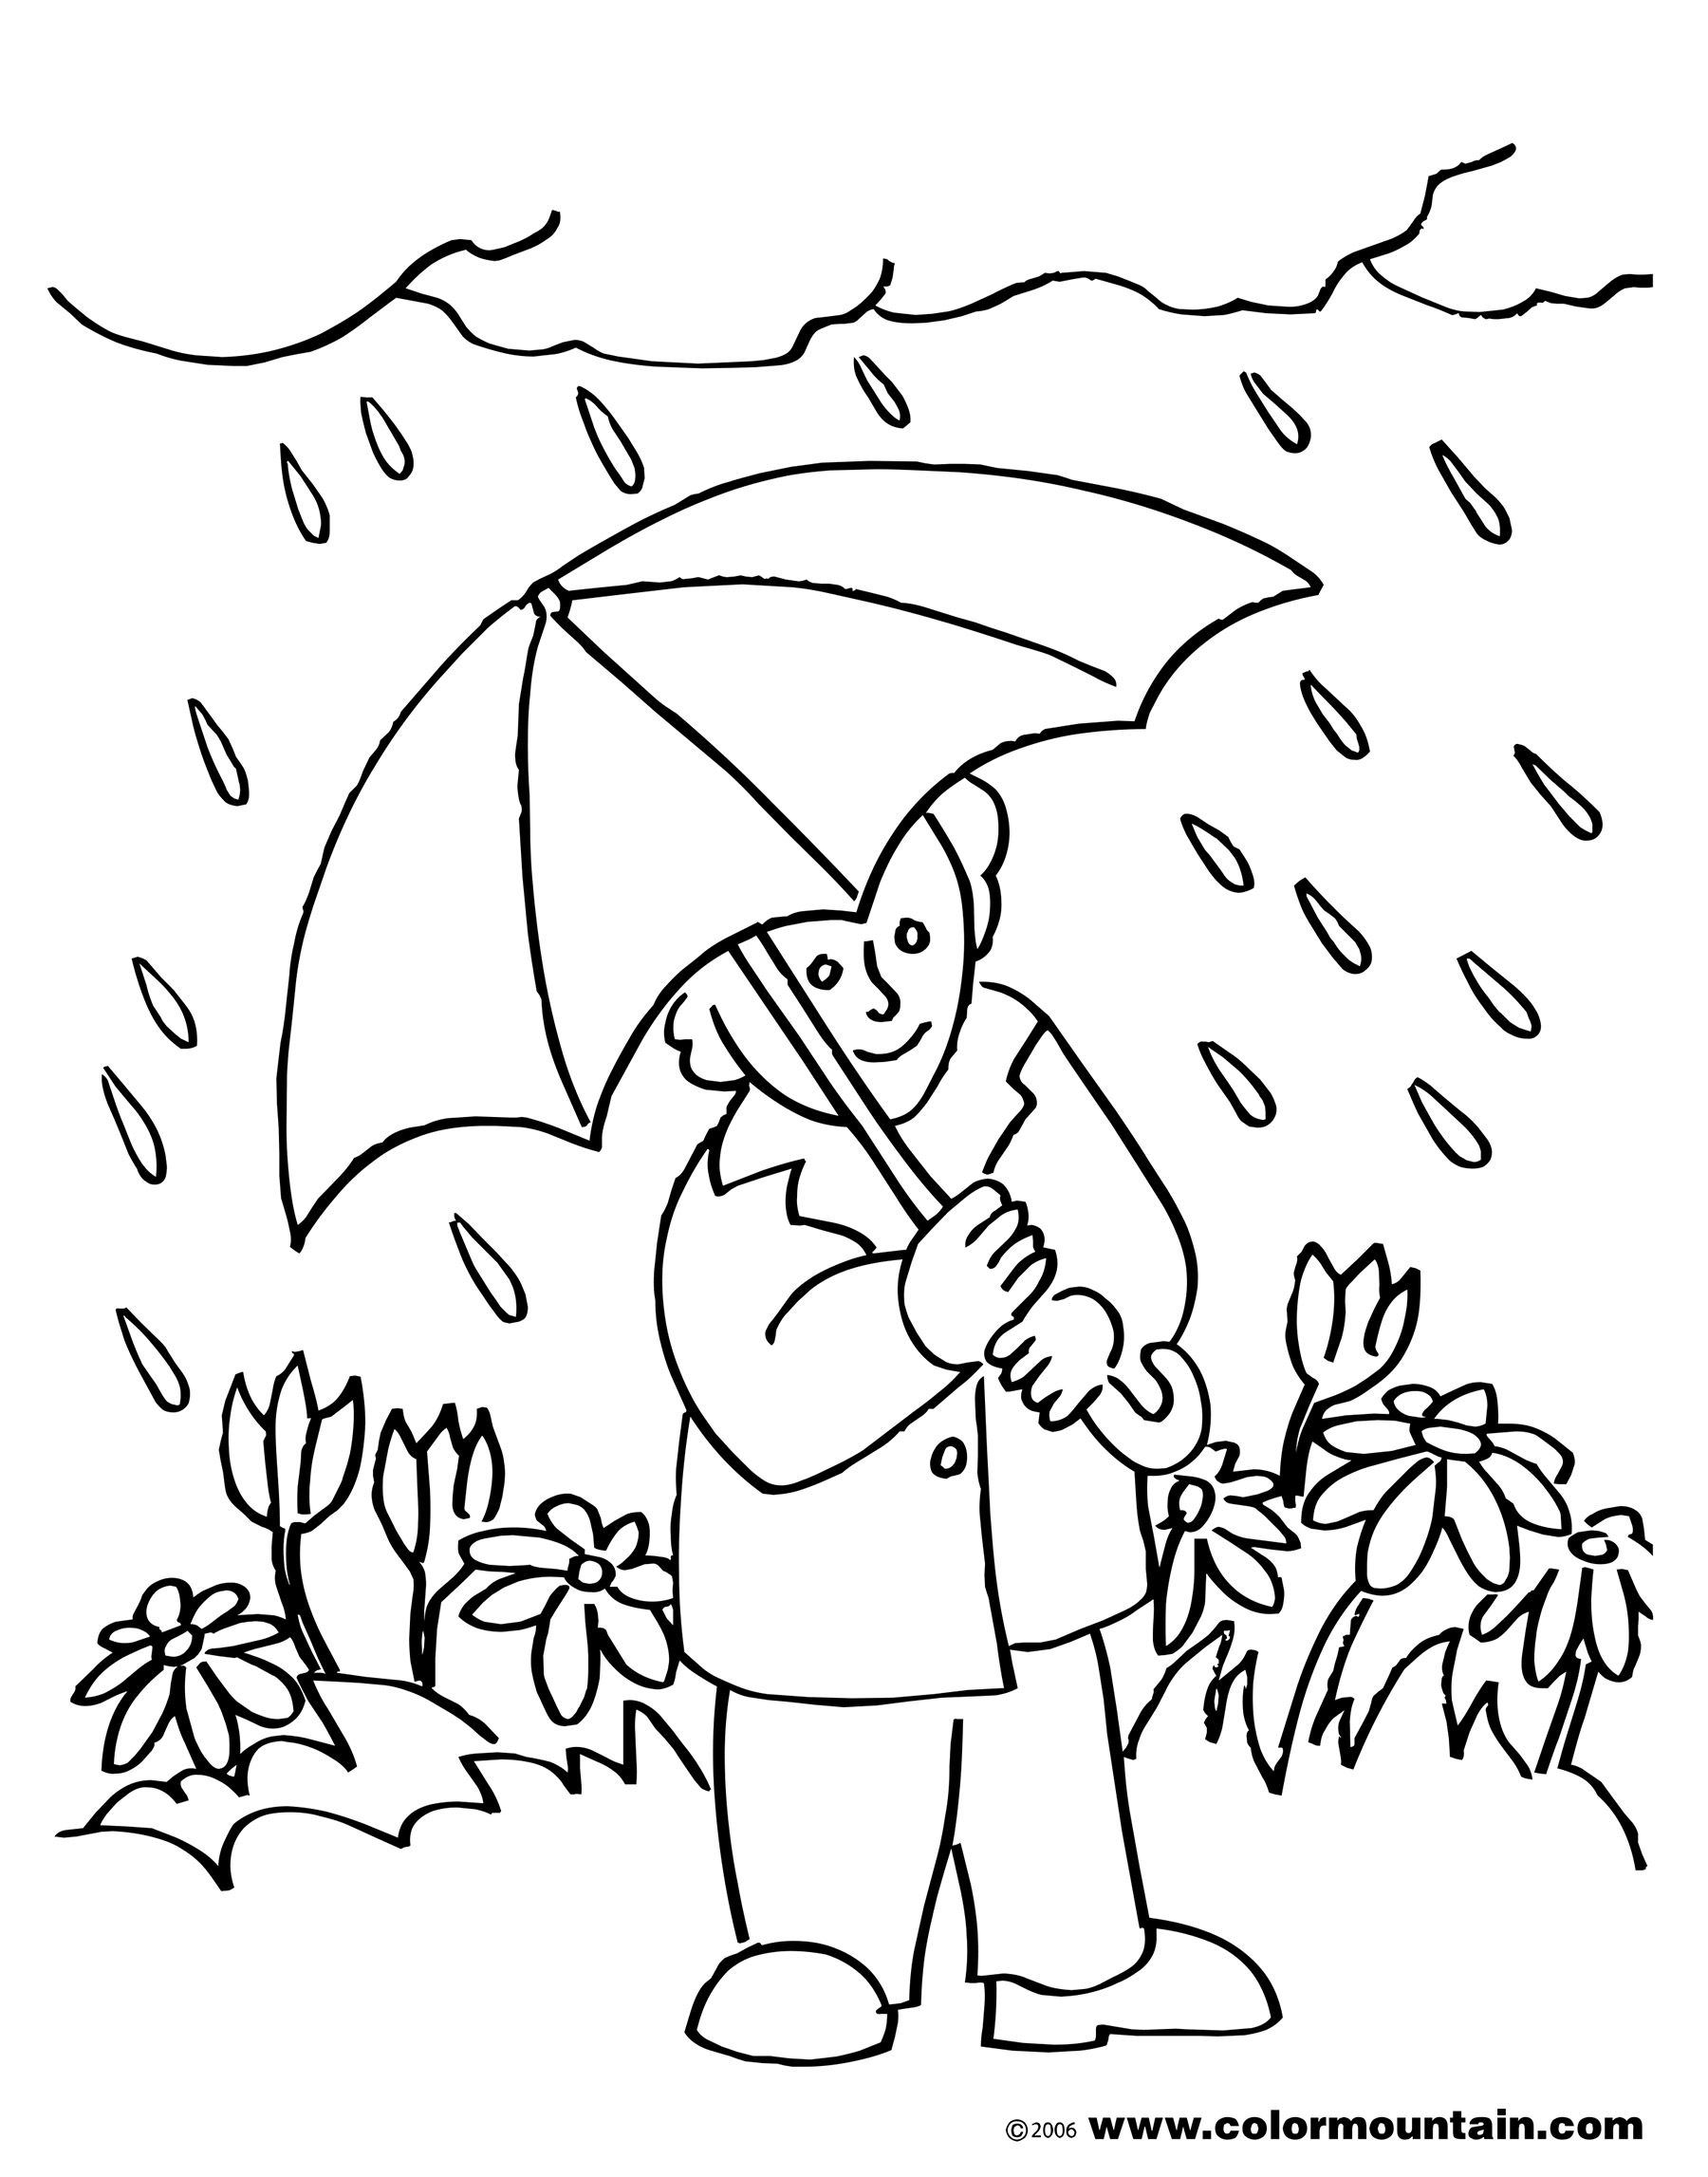 Rainy Day Coloring Pages Free Printable Rainy Day Col - vrogue.co